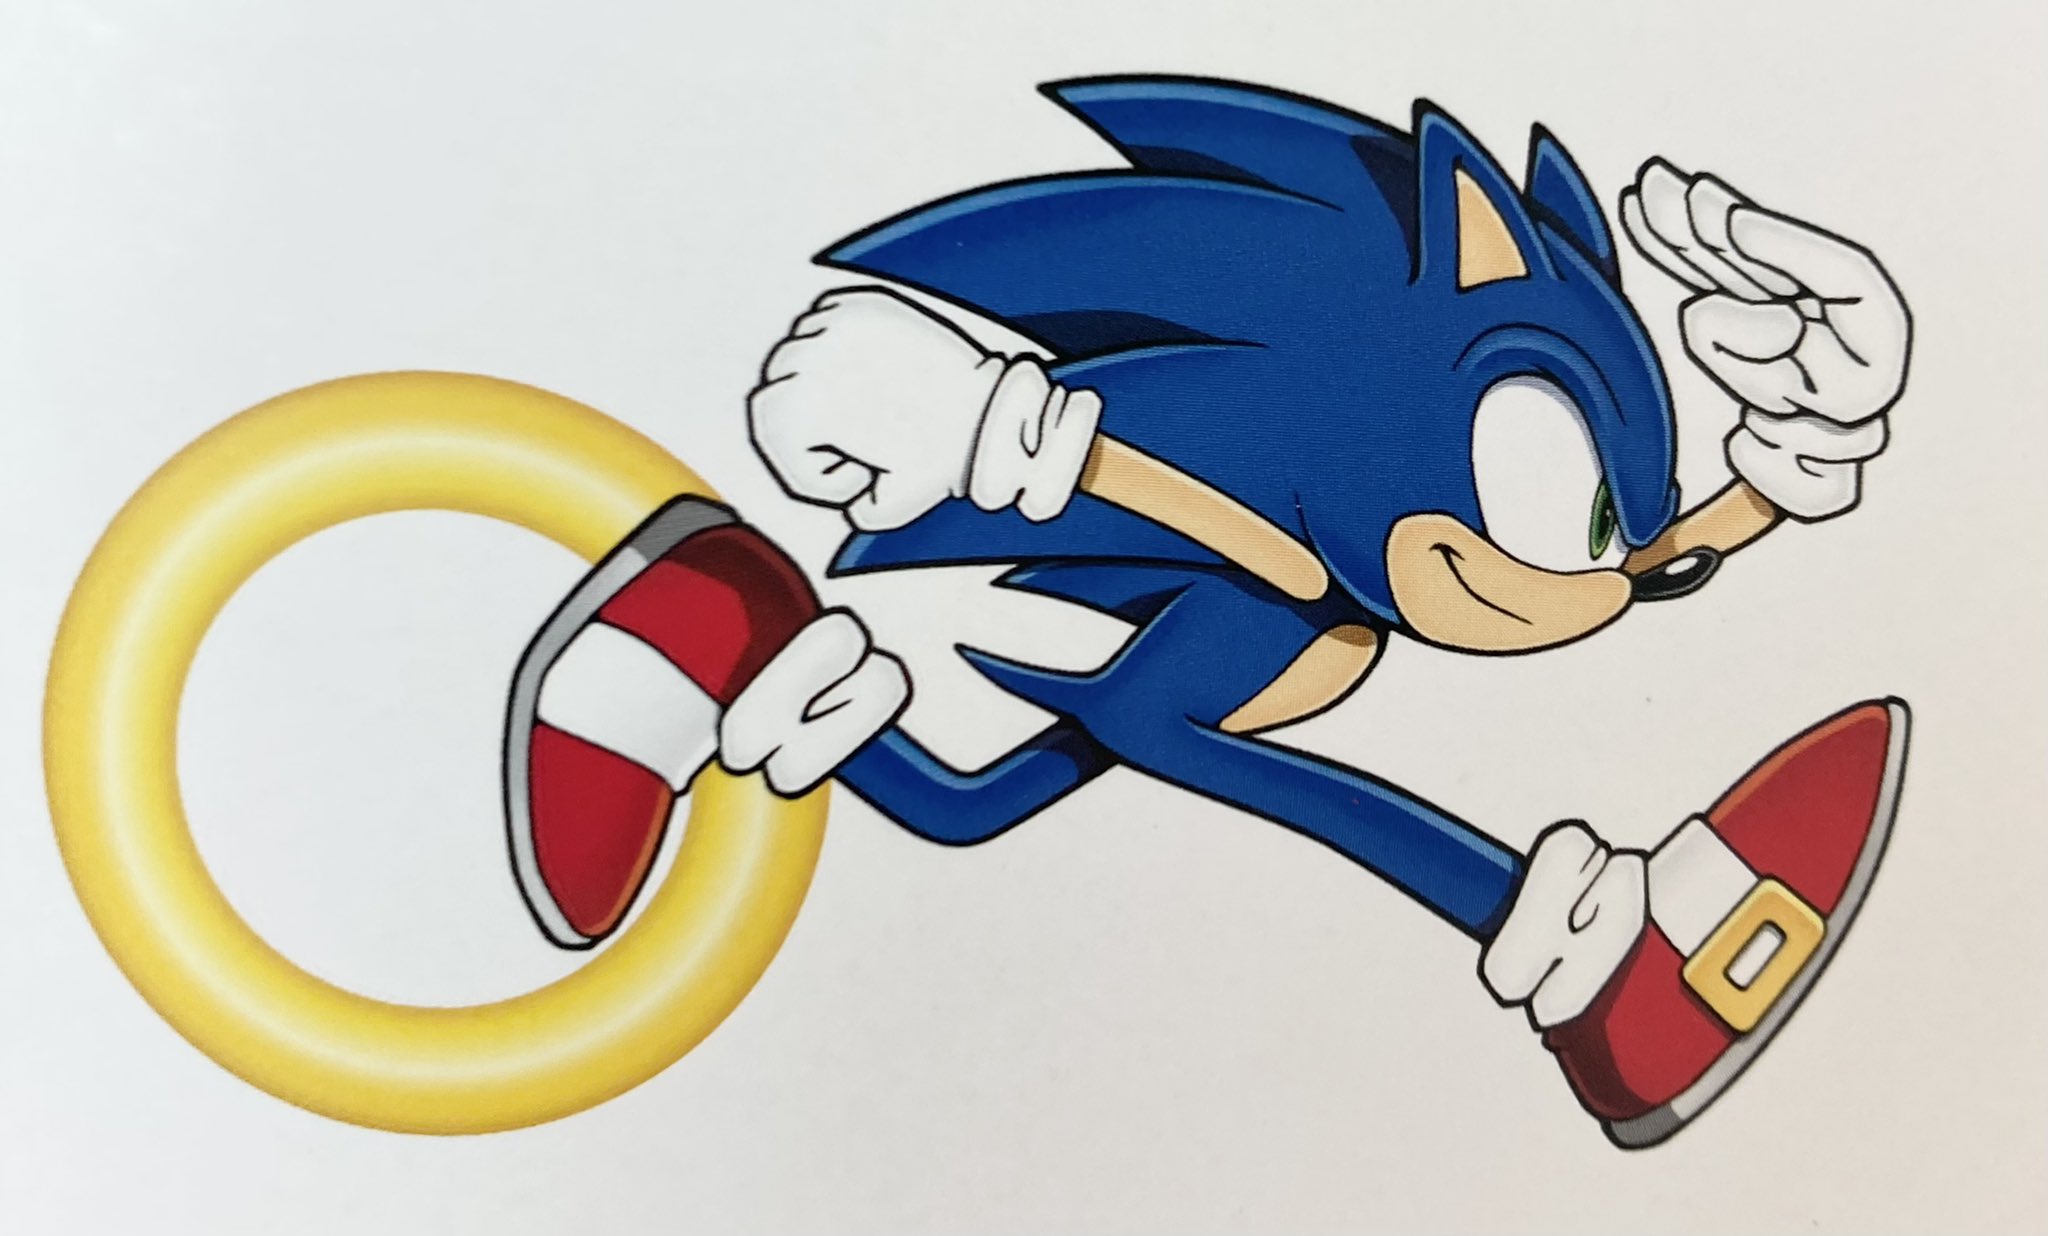 Classic Sonic FREE-TO-USE Artwork by PeviAnimations on Newgrounds